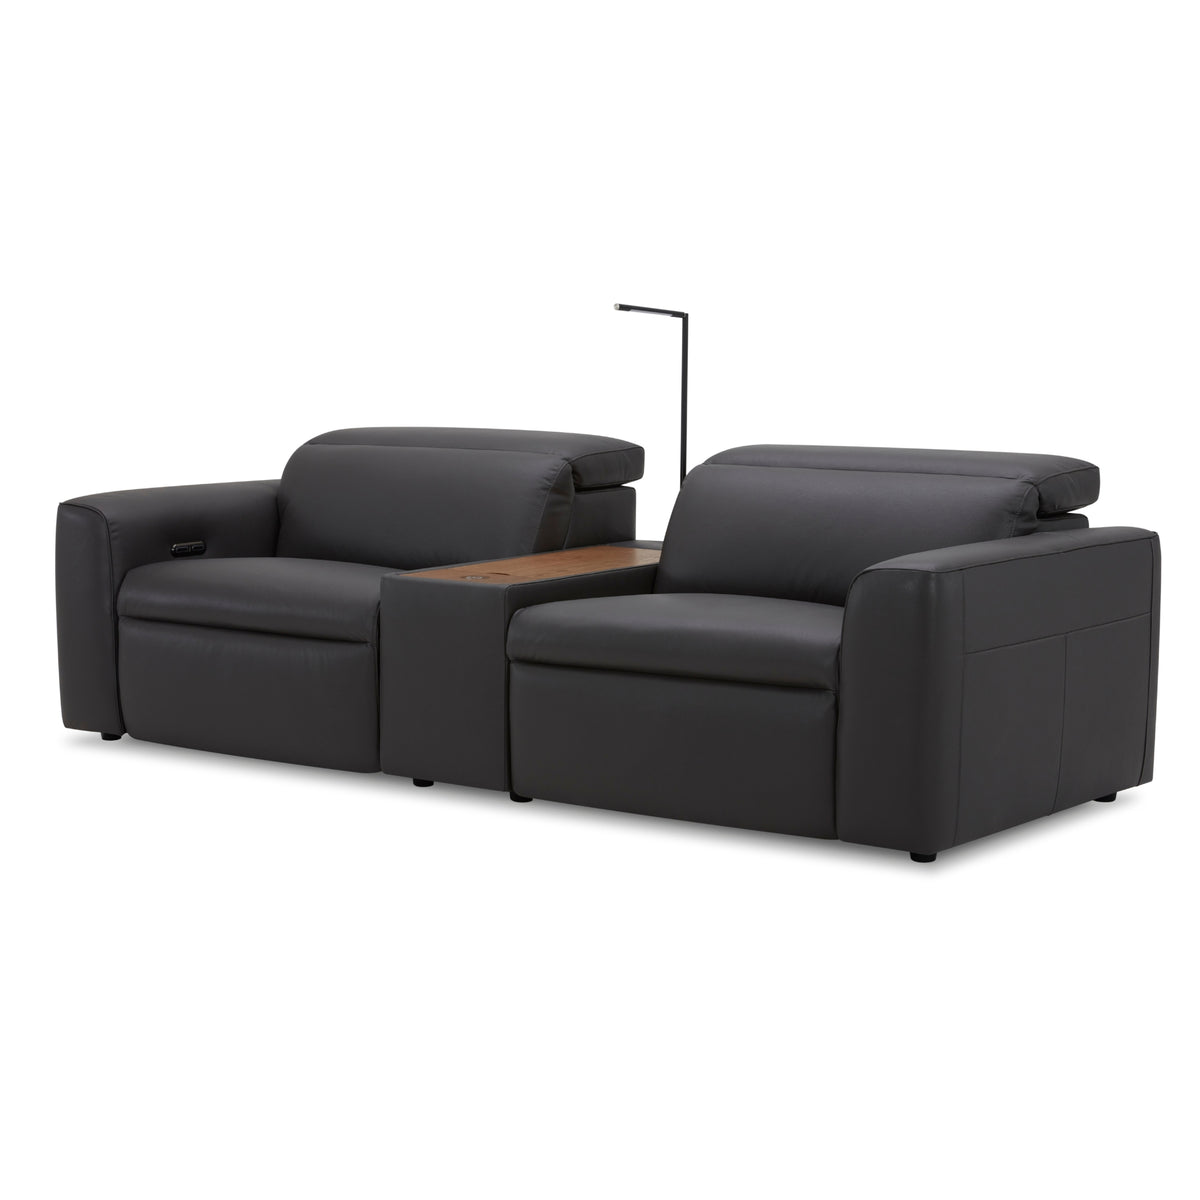 Hallie 2 Seater Leather Electric Recliner Sofa Graphite 